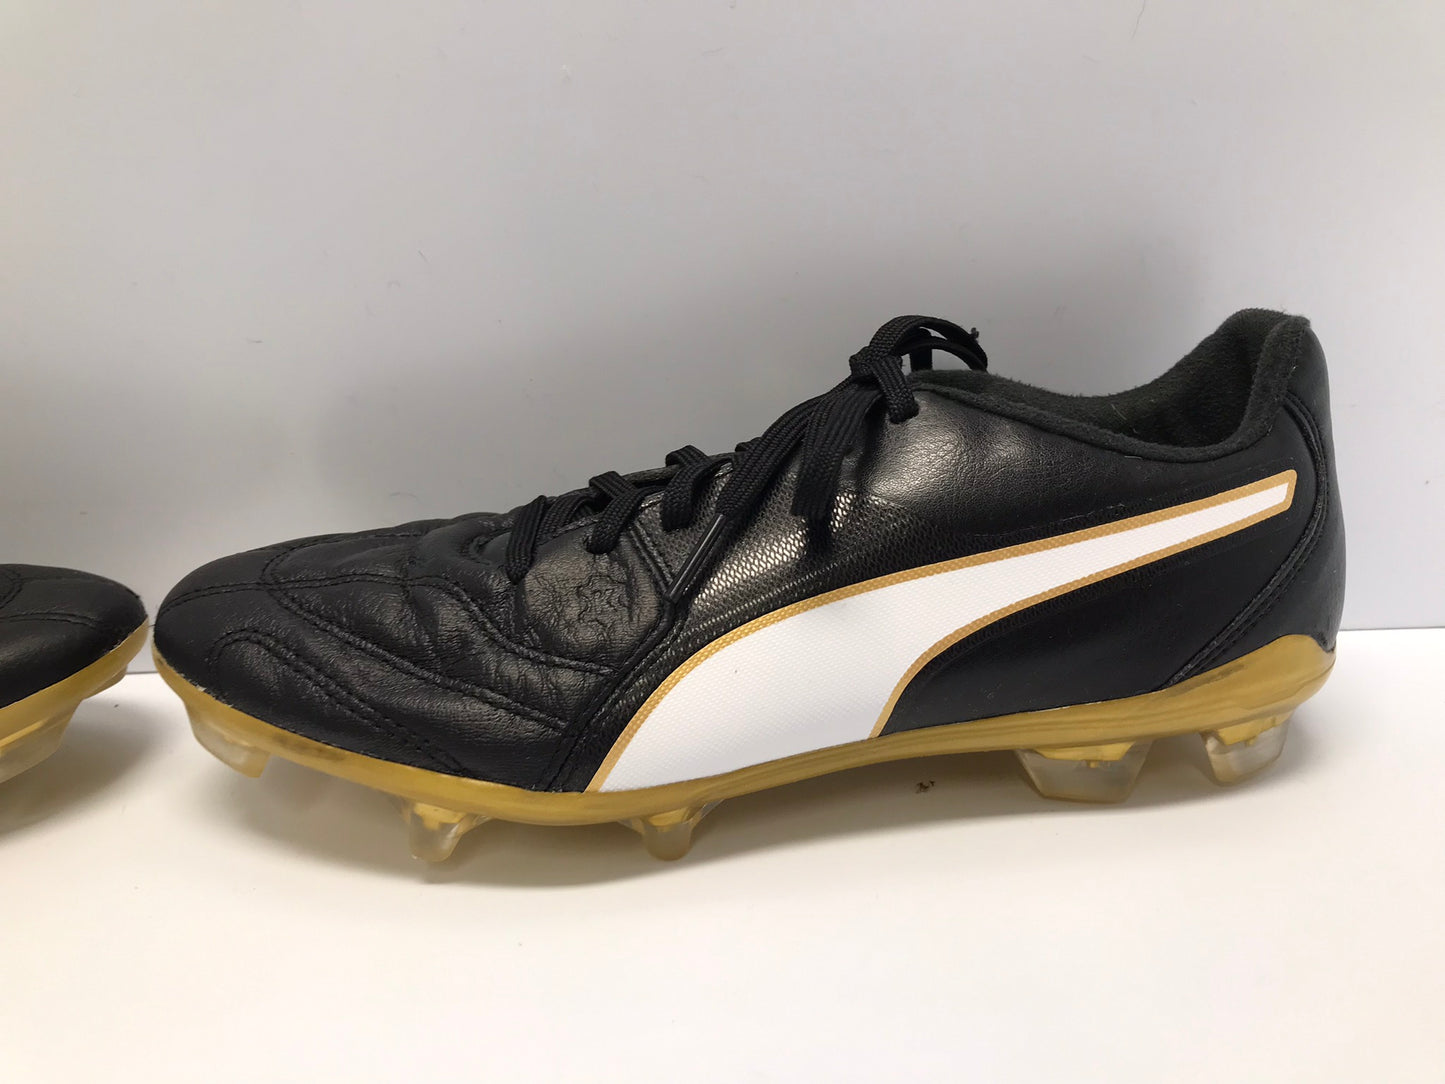 Soccer Shoes Cleats Men's Size 6 Puma Capitano Leather Black Gold New Demo Model